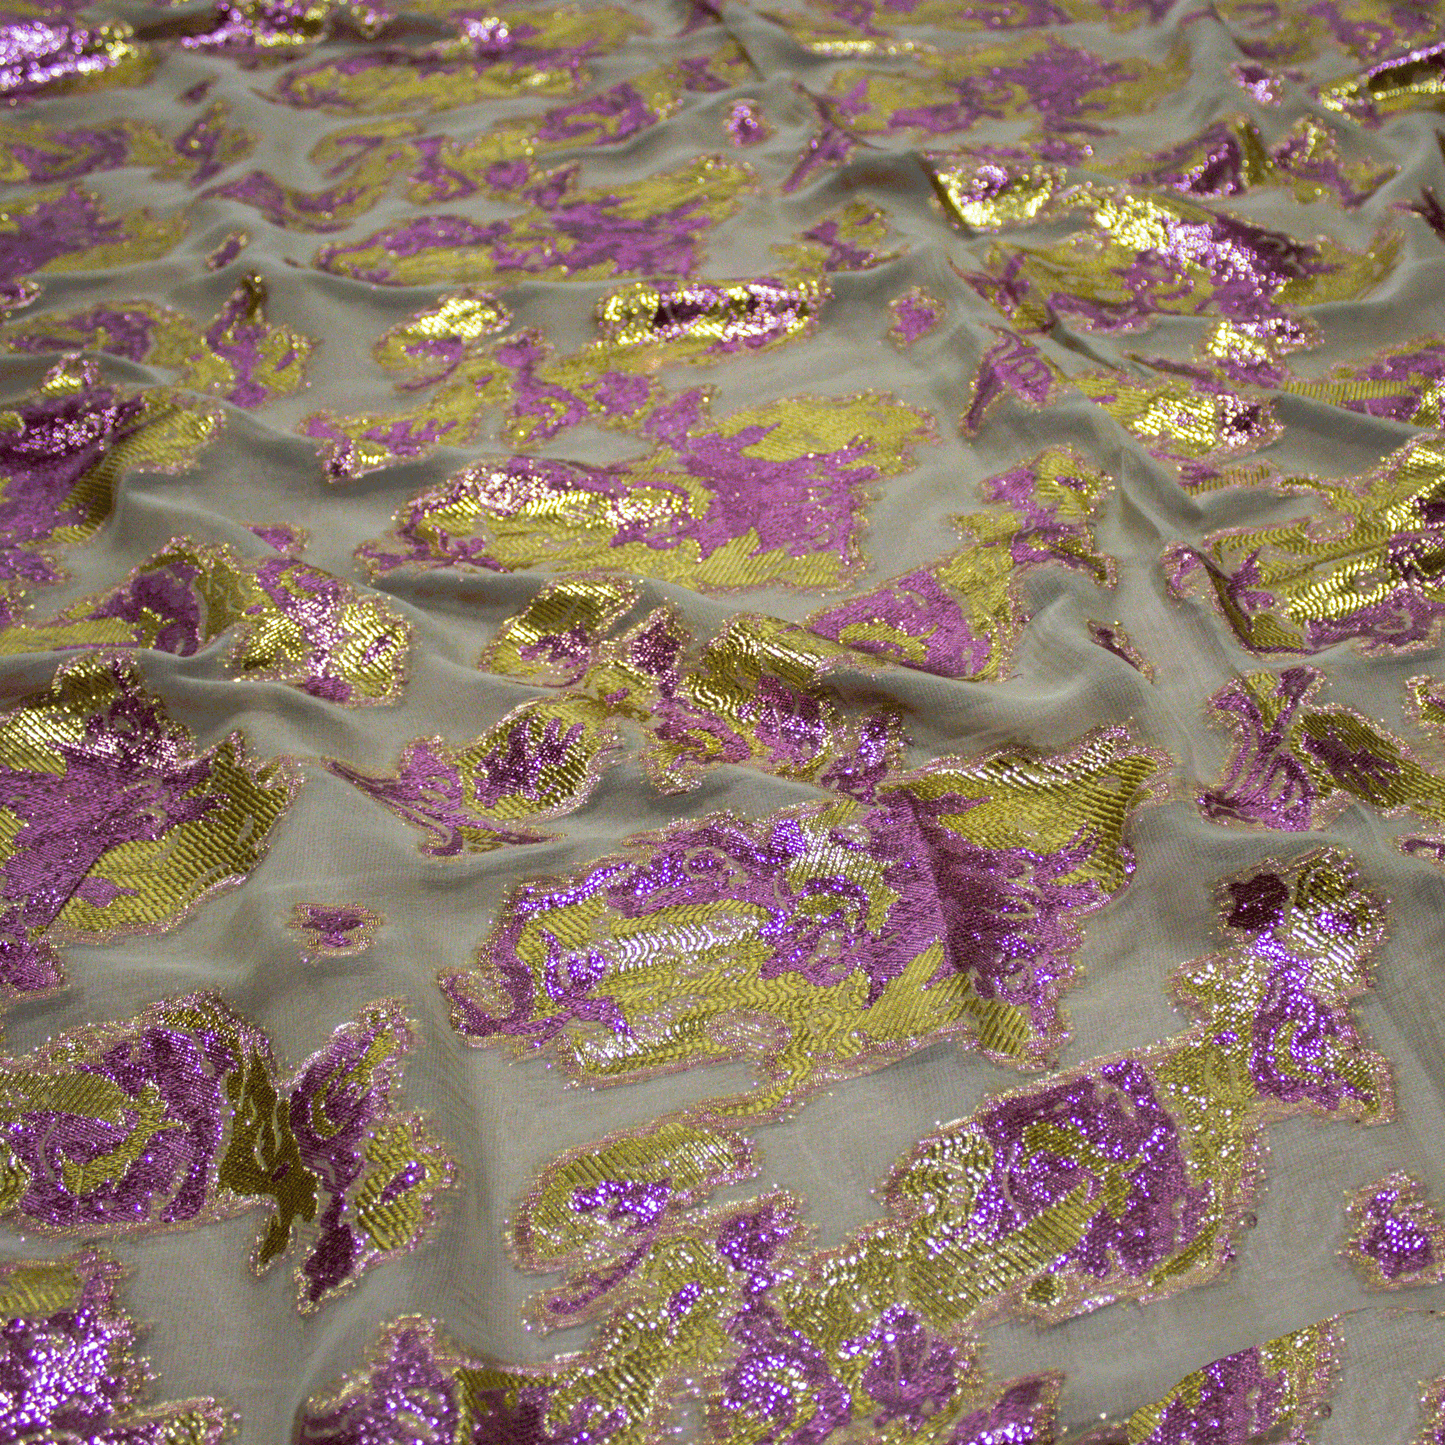 Not your ordinary Somali dirac, feast your eyes on our beautiful Mocha BrownDirac fransawi, made from fine fabric with intricate floral design patterns.